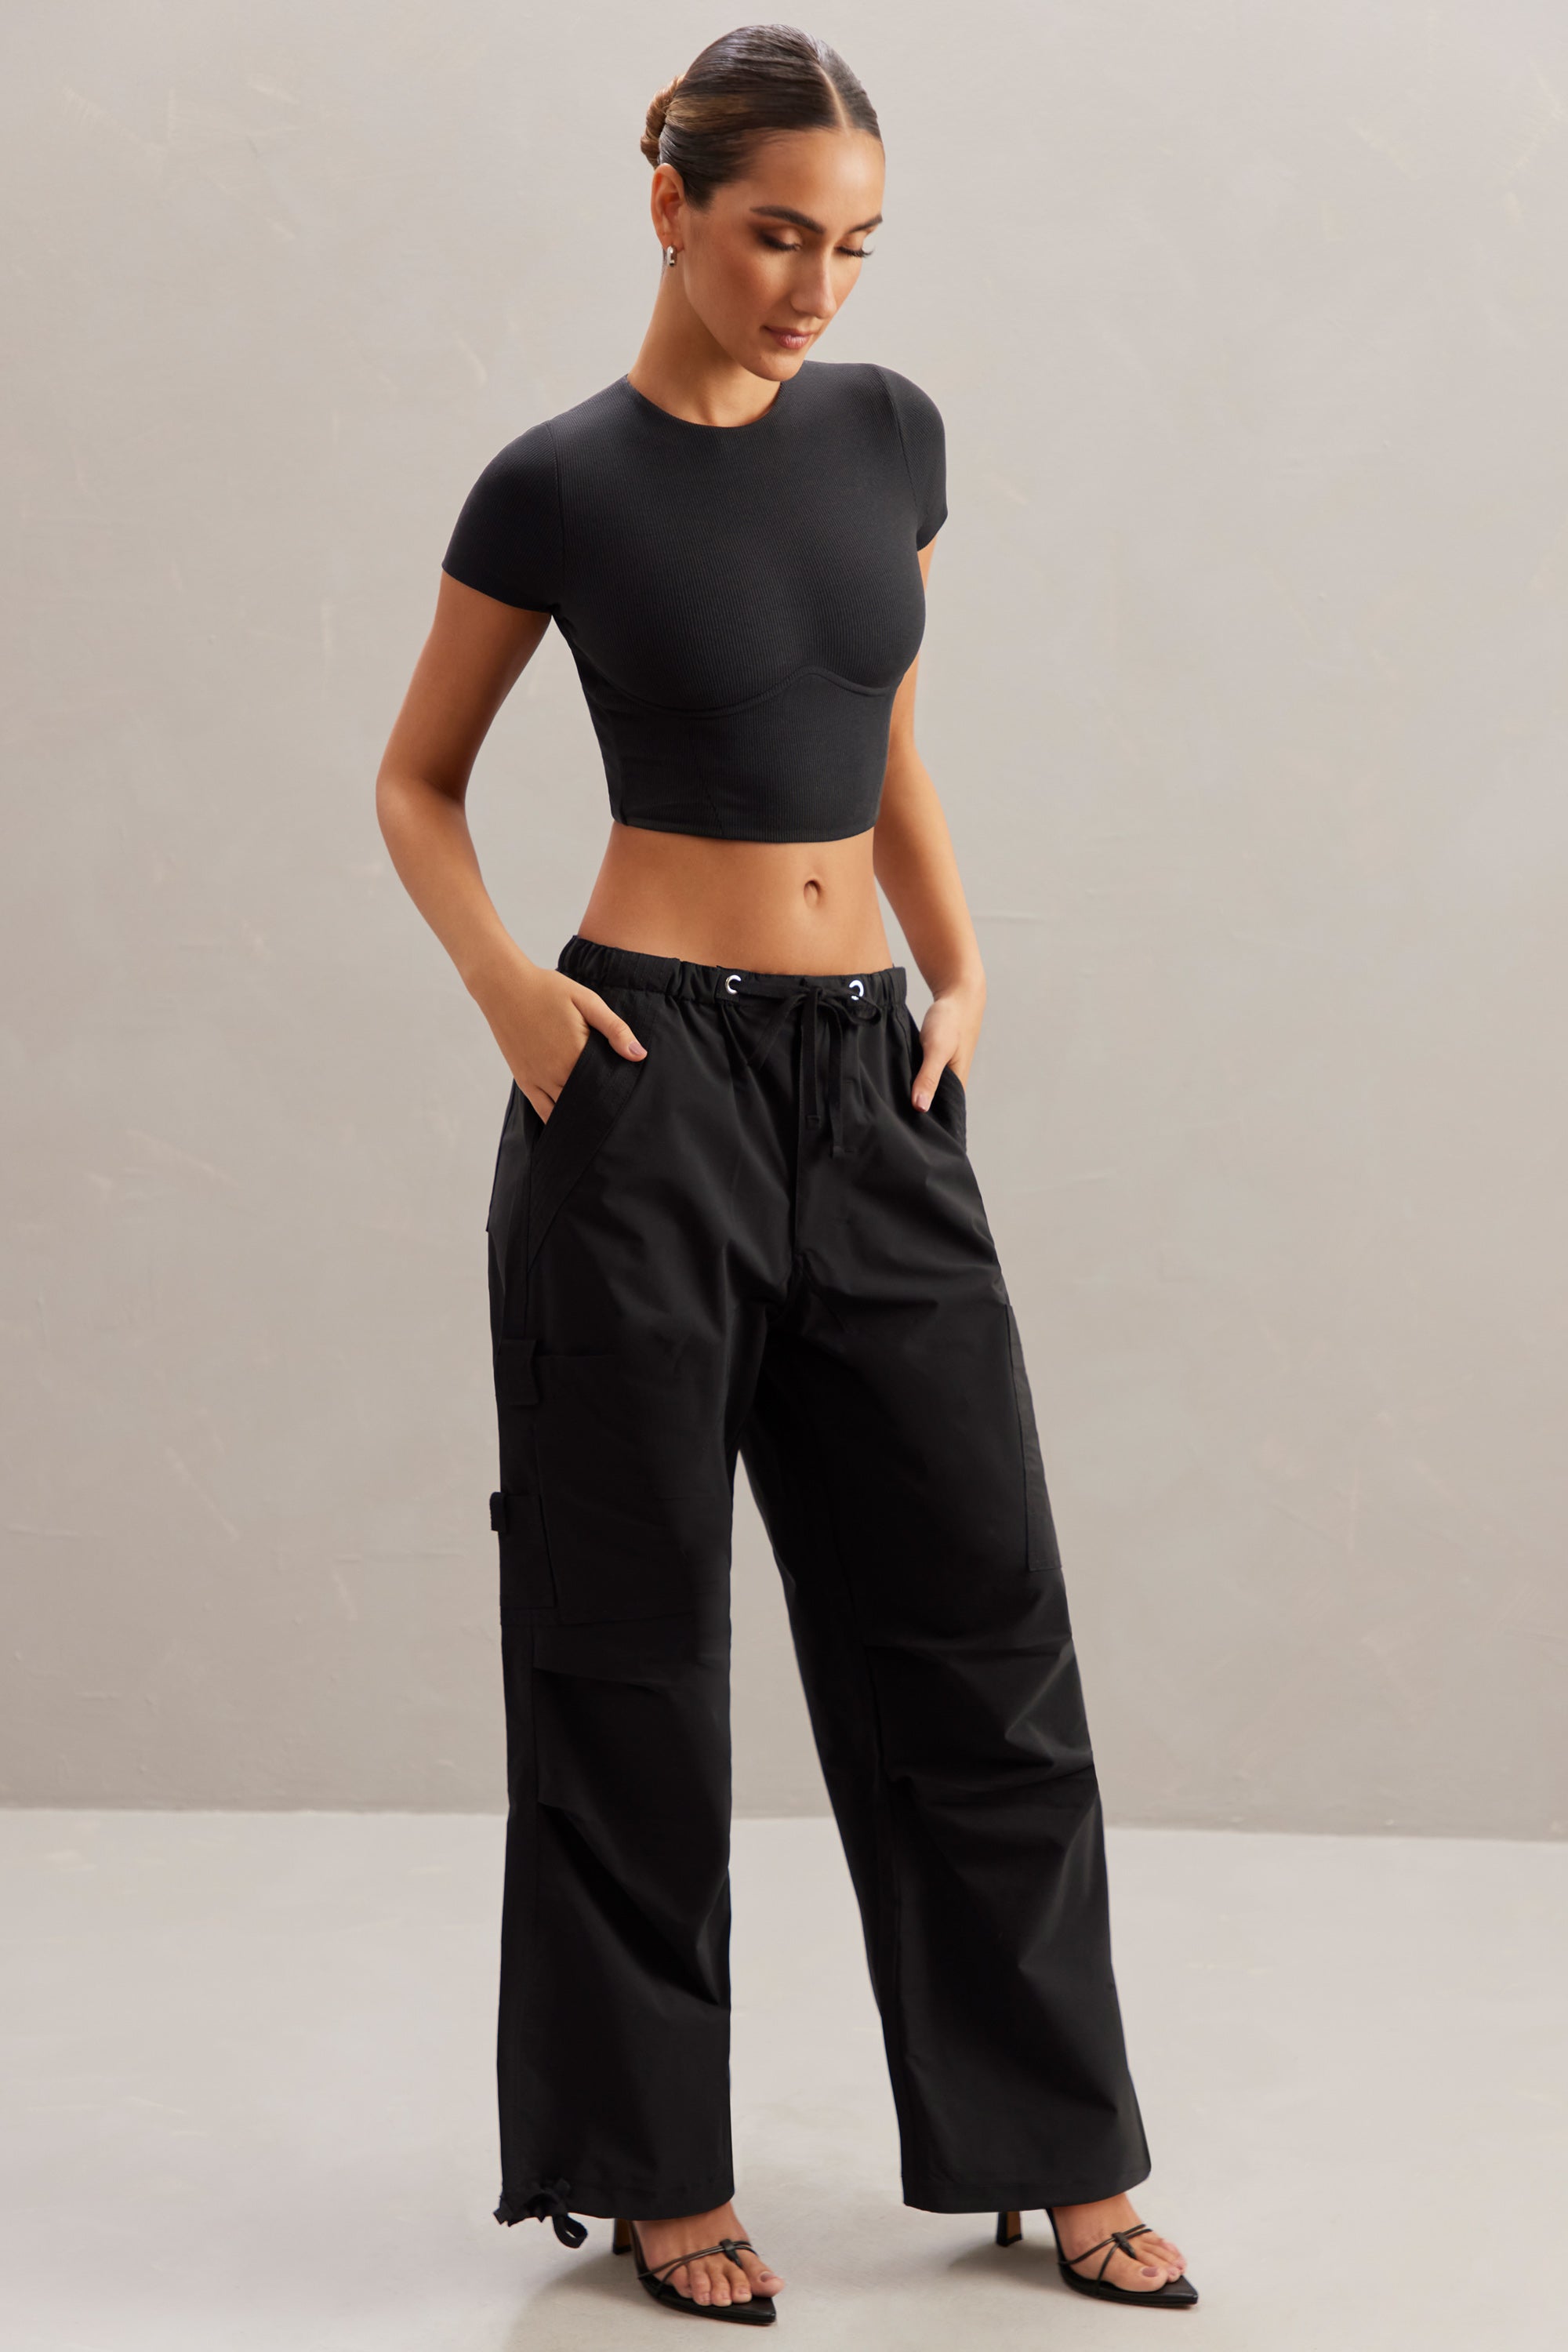 Flounce London Tall wide leg pants with gold button detail in red  ASOS   Cropped wide leg trousers Tall wide leg trousers Tall wide leg pants